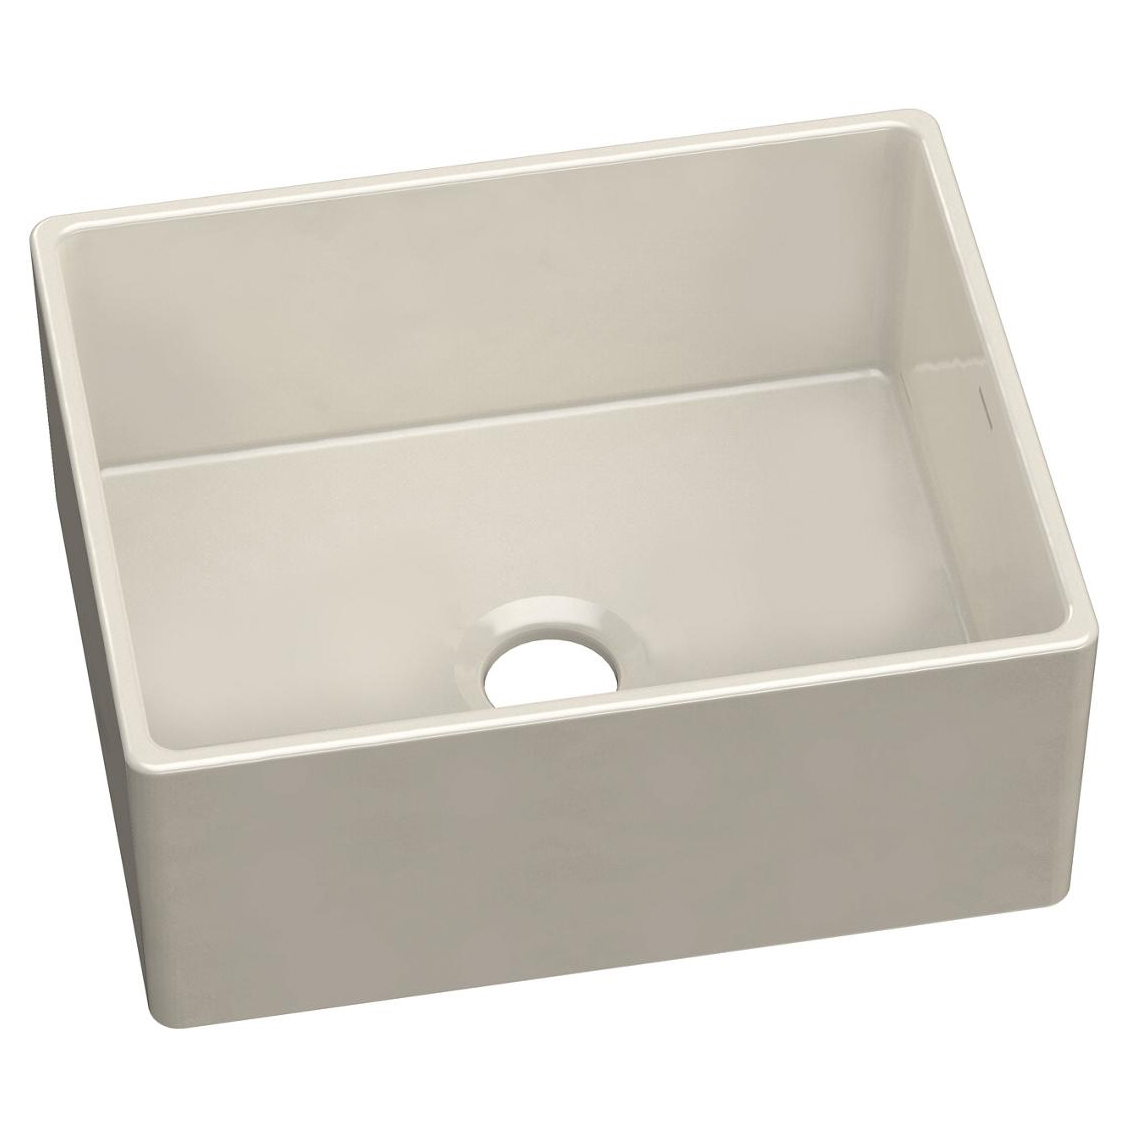 24-3/8x19-5/8x10-1/8" Fireclay Farmhouse Sink in Biscuit